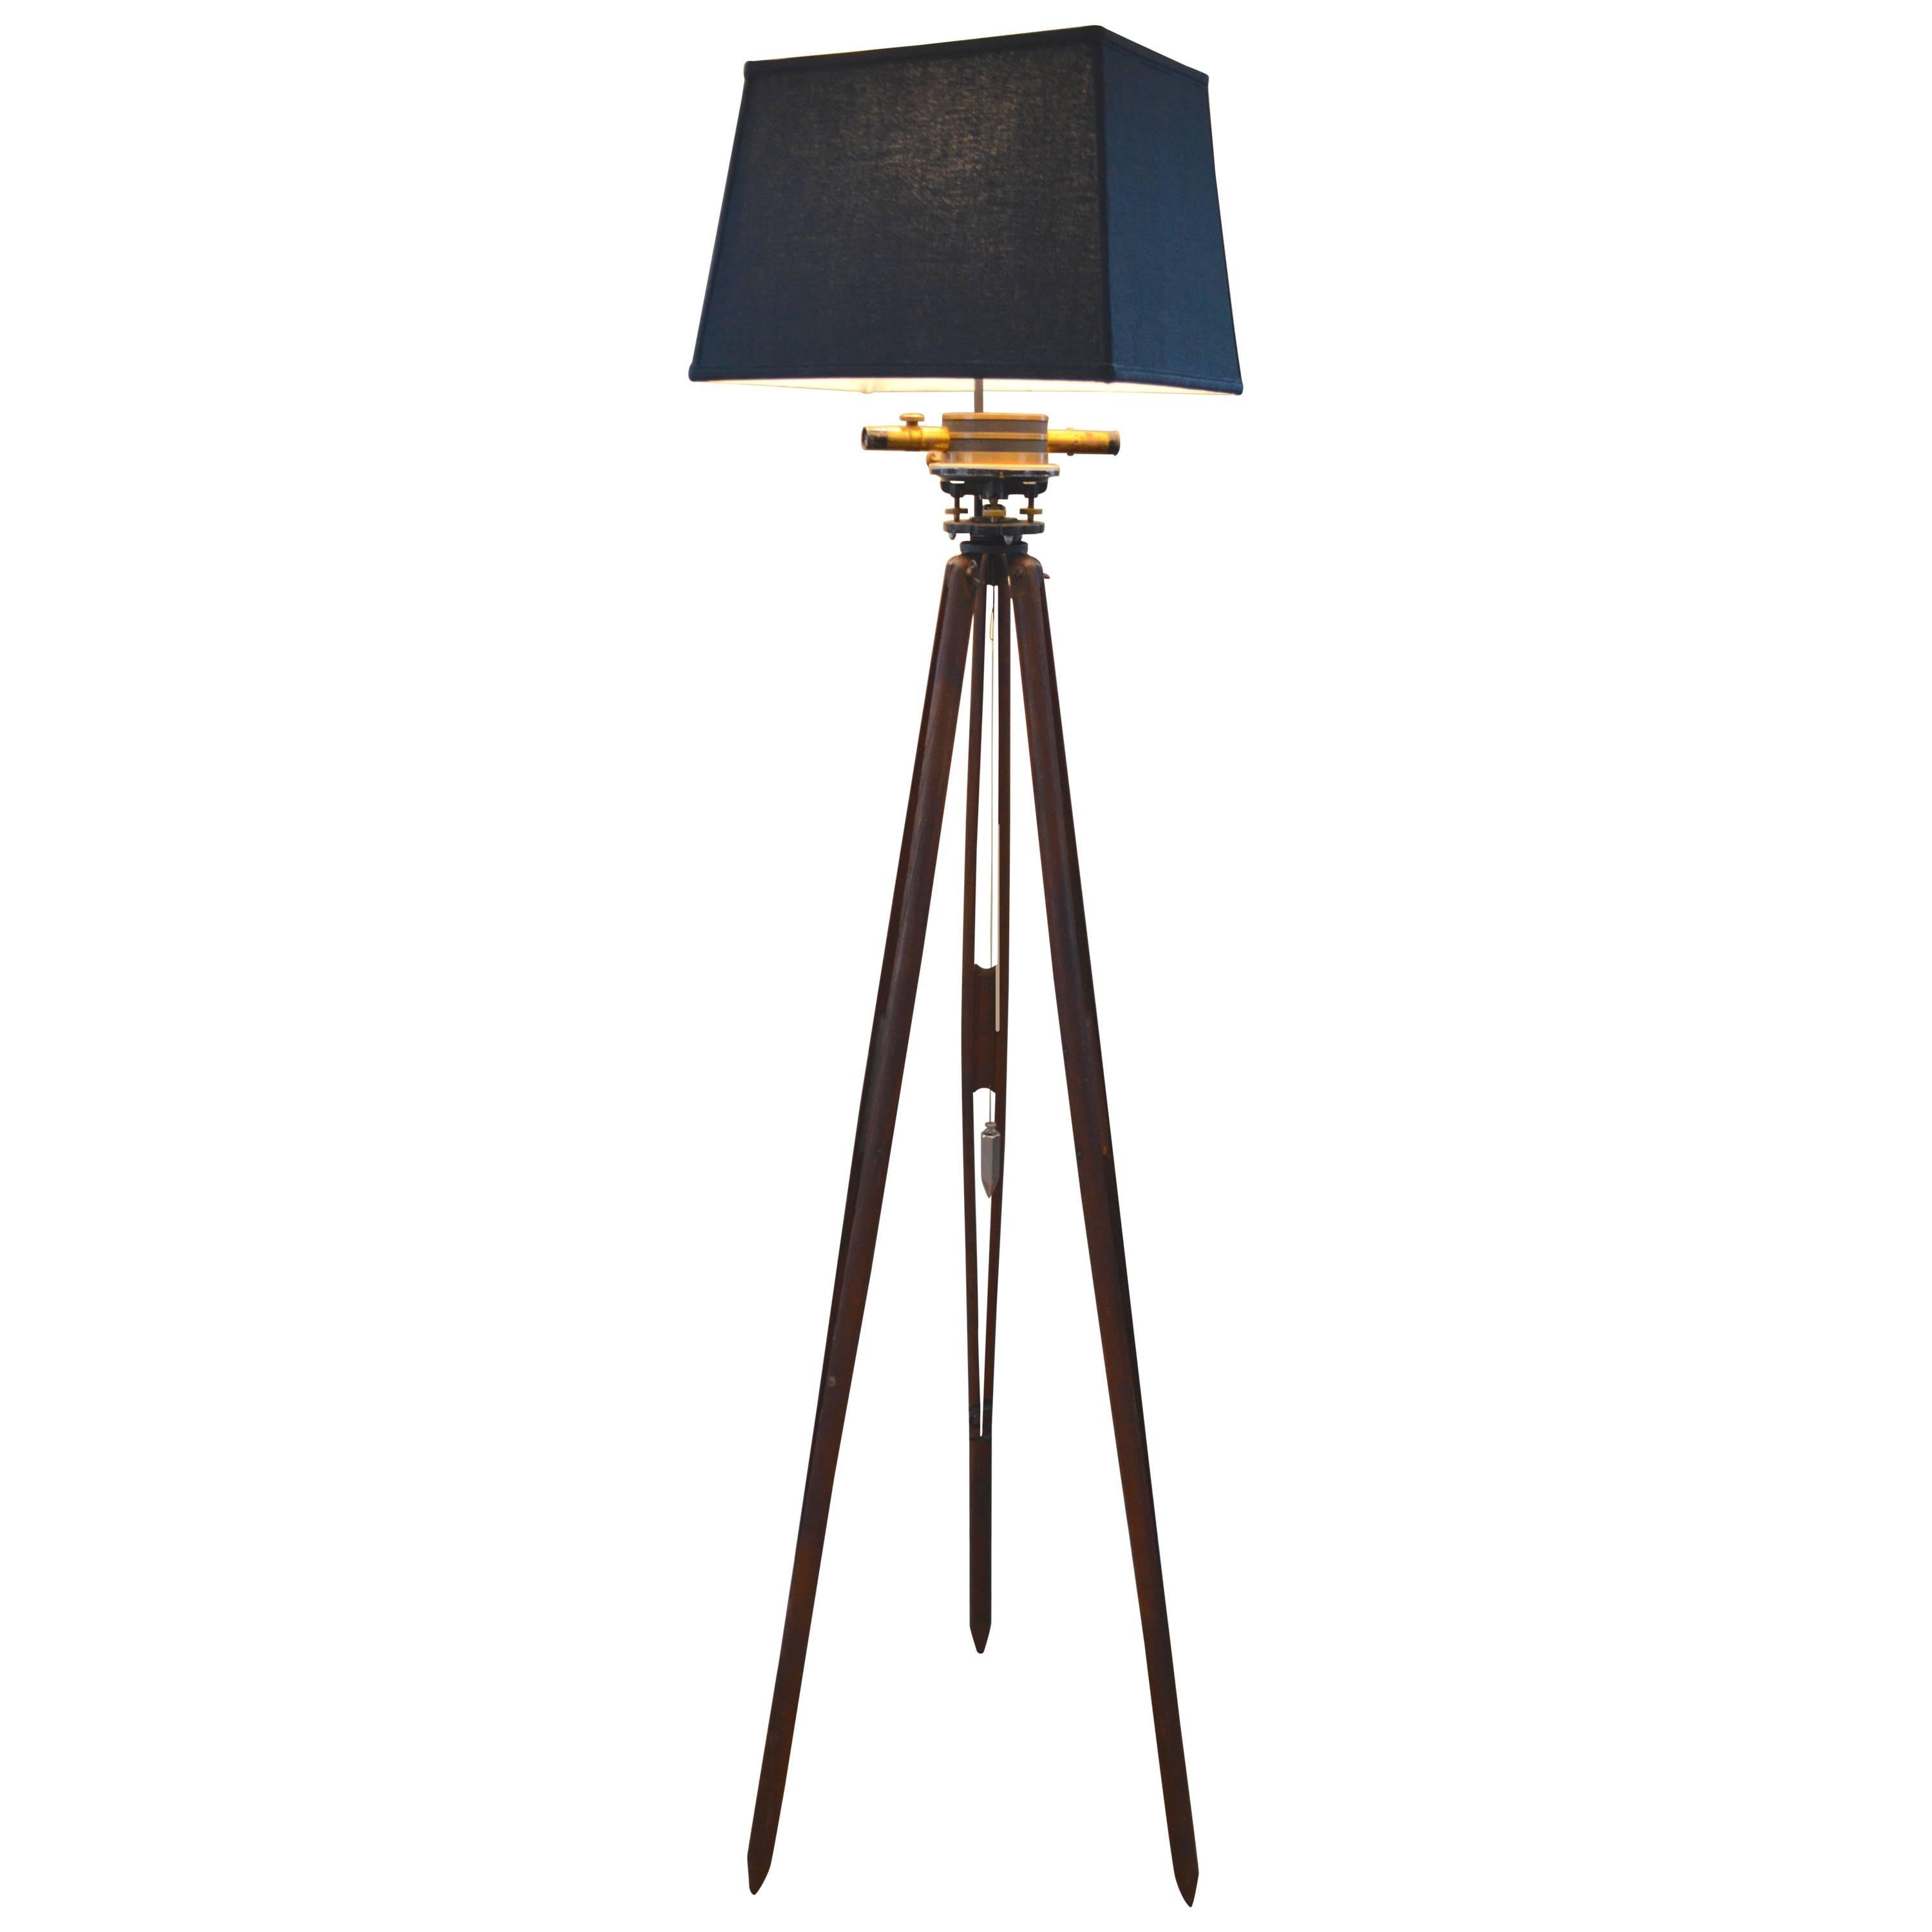 Floor Lamp Fashioned from Surveyor's Tripod with Telescoping Brass Hardware